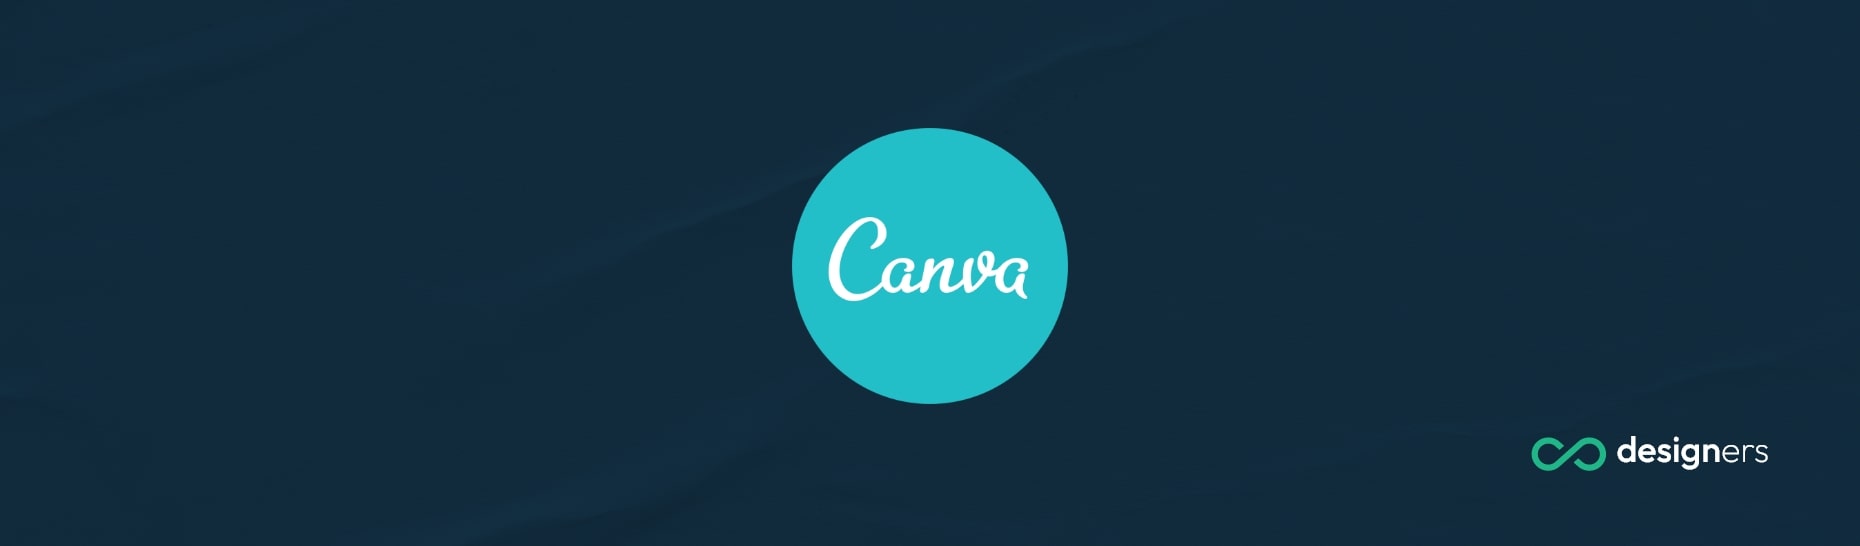 Is Canva GDPR Compliant?